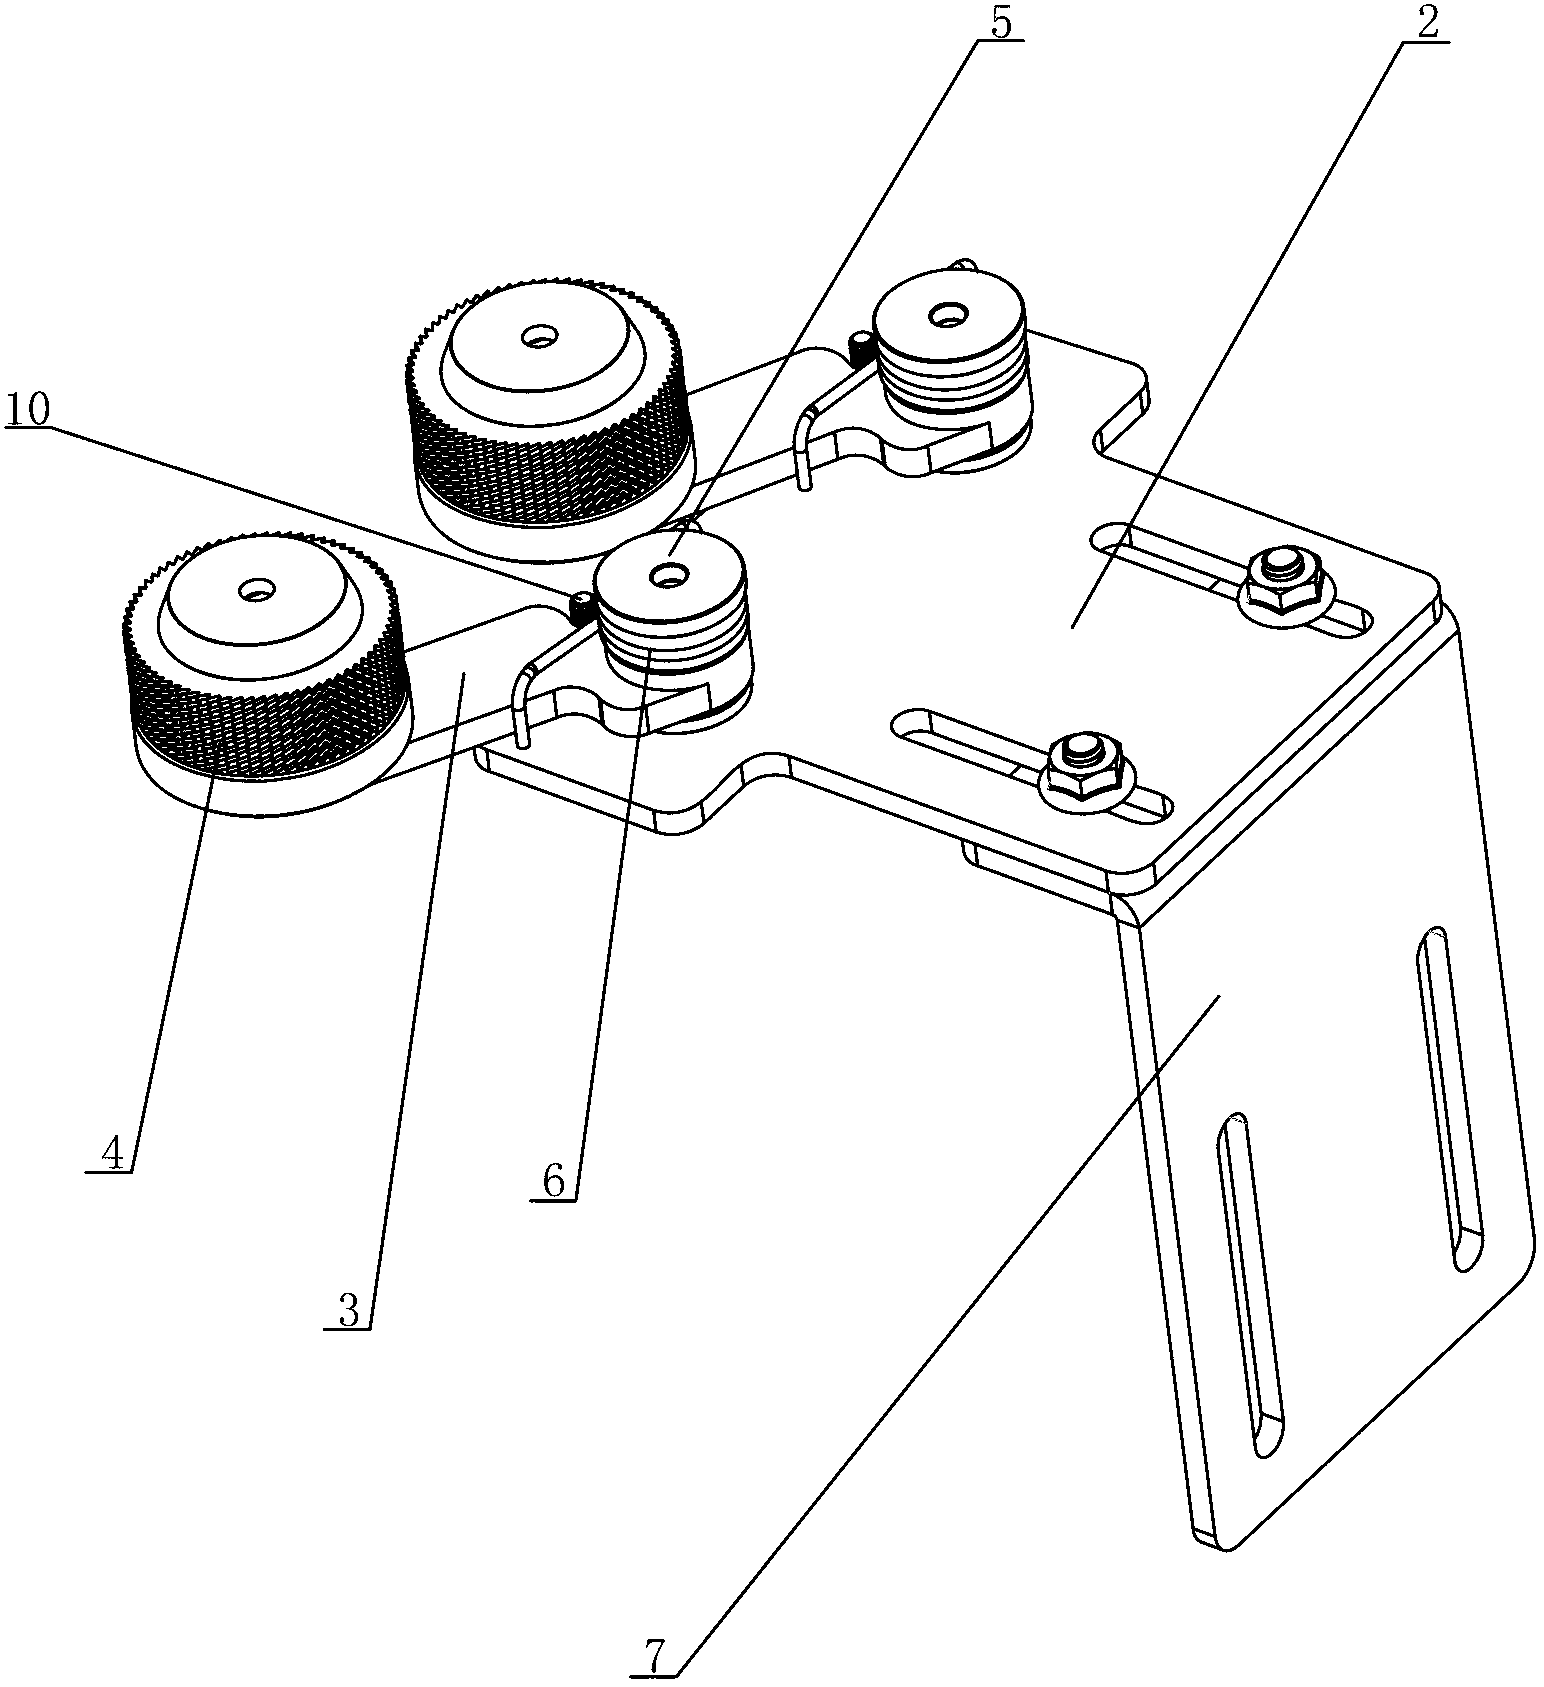 Device for automatically cleaning tail yarn